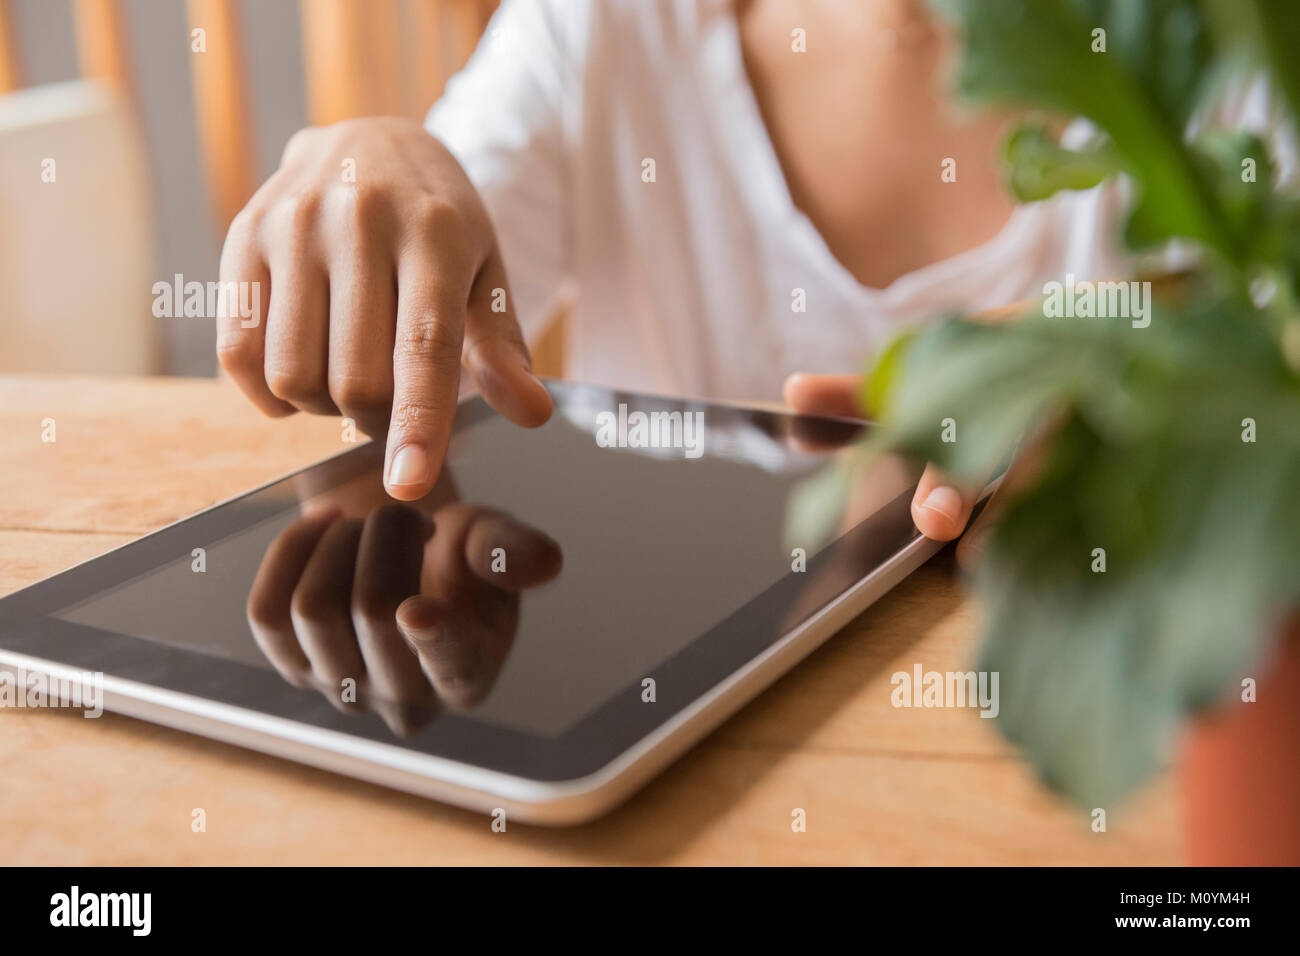 Hands of African American woman using digital tablet Stock Photo